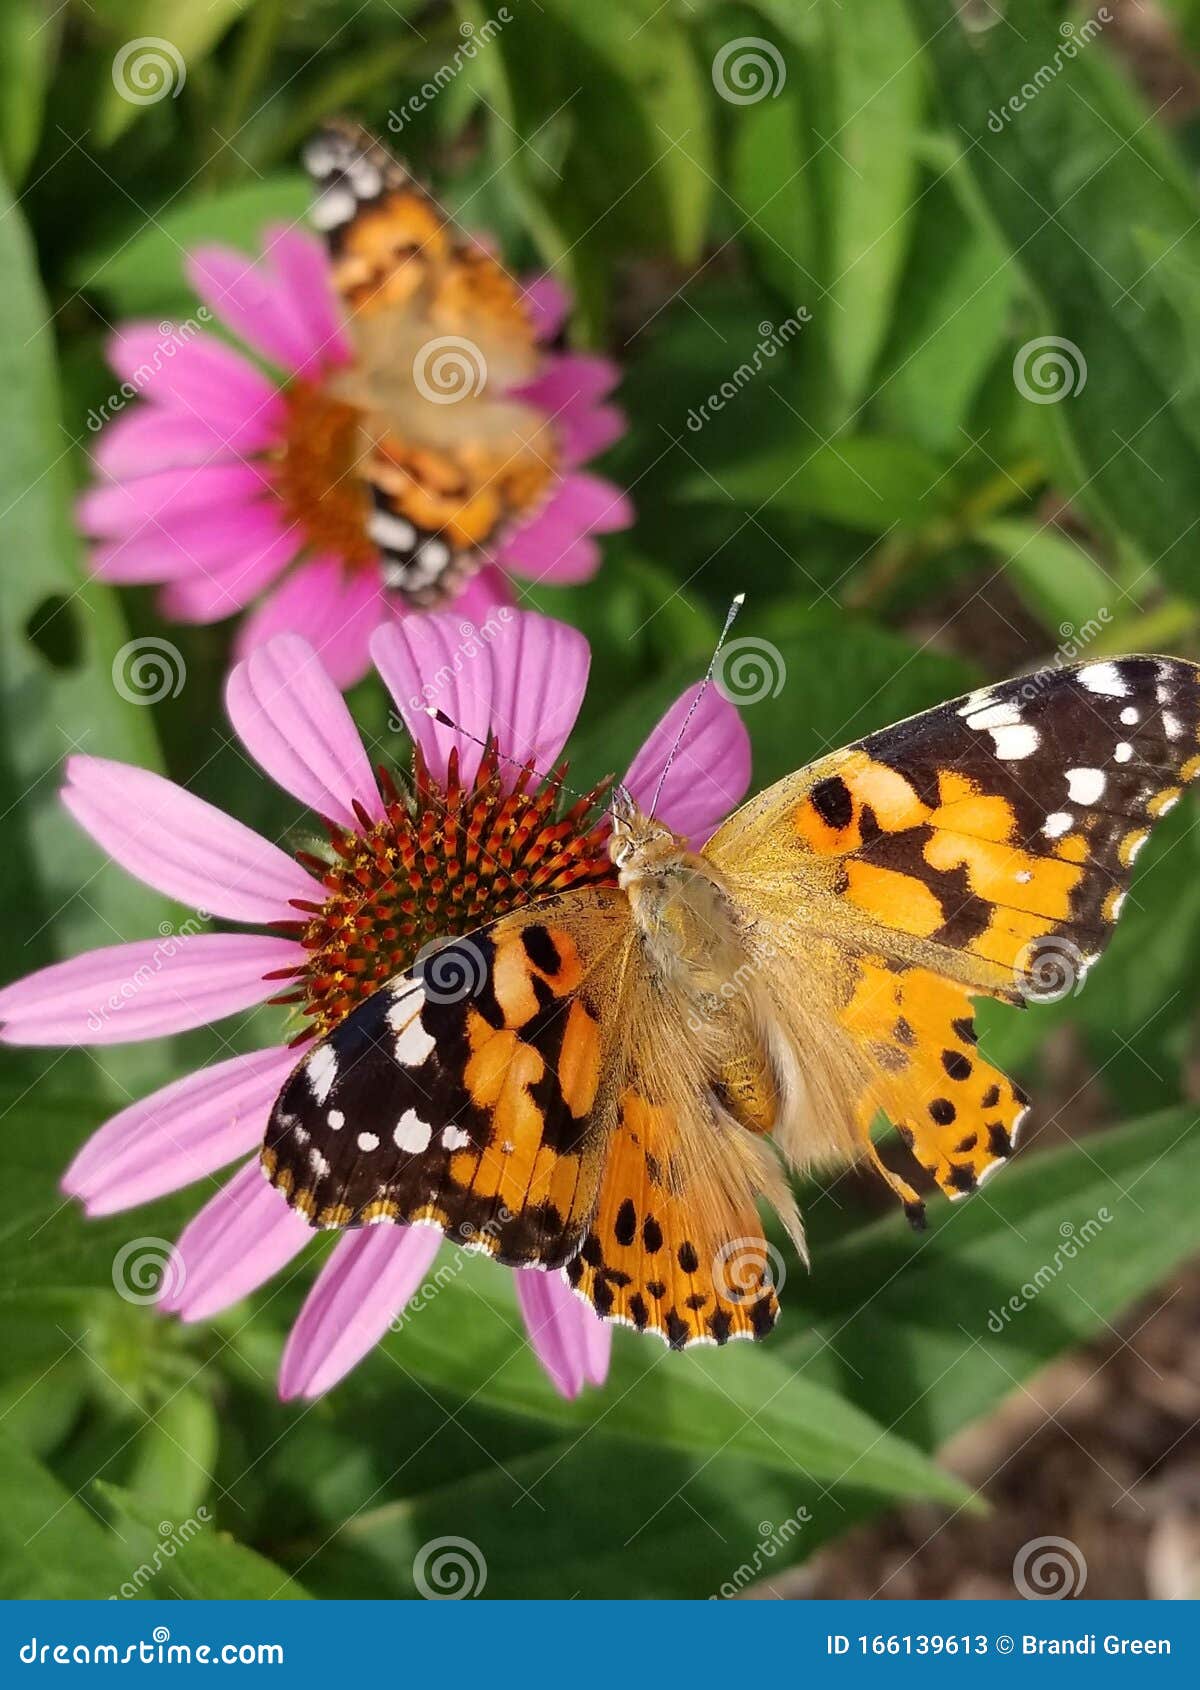 Monarch Butterfly on Pink Flower Stock Image - Image of flower, pink ...